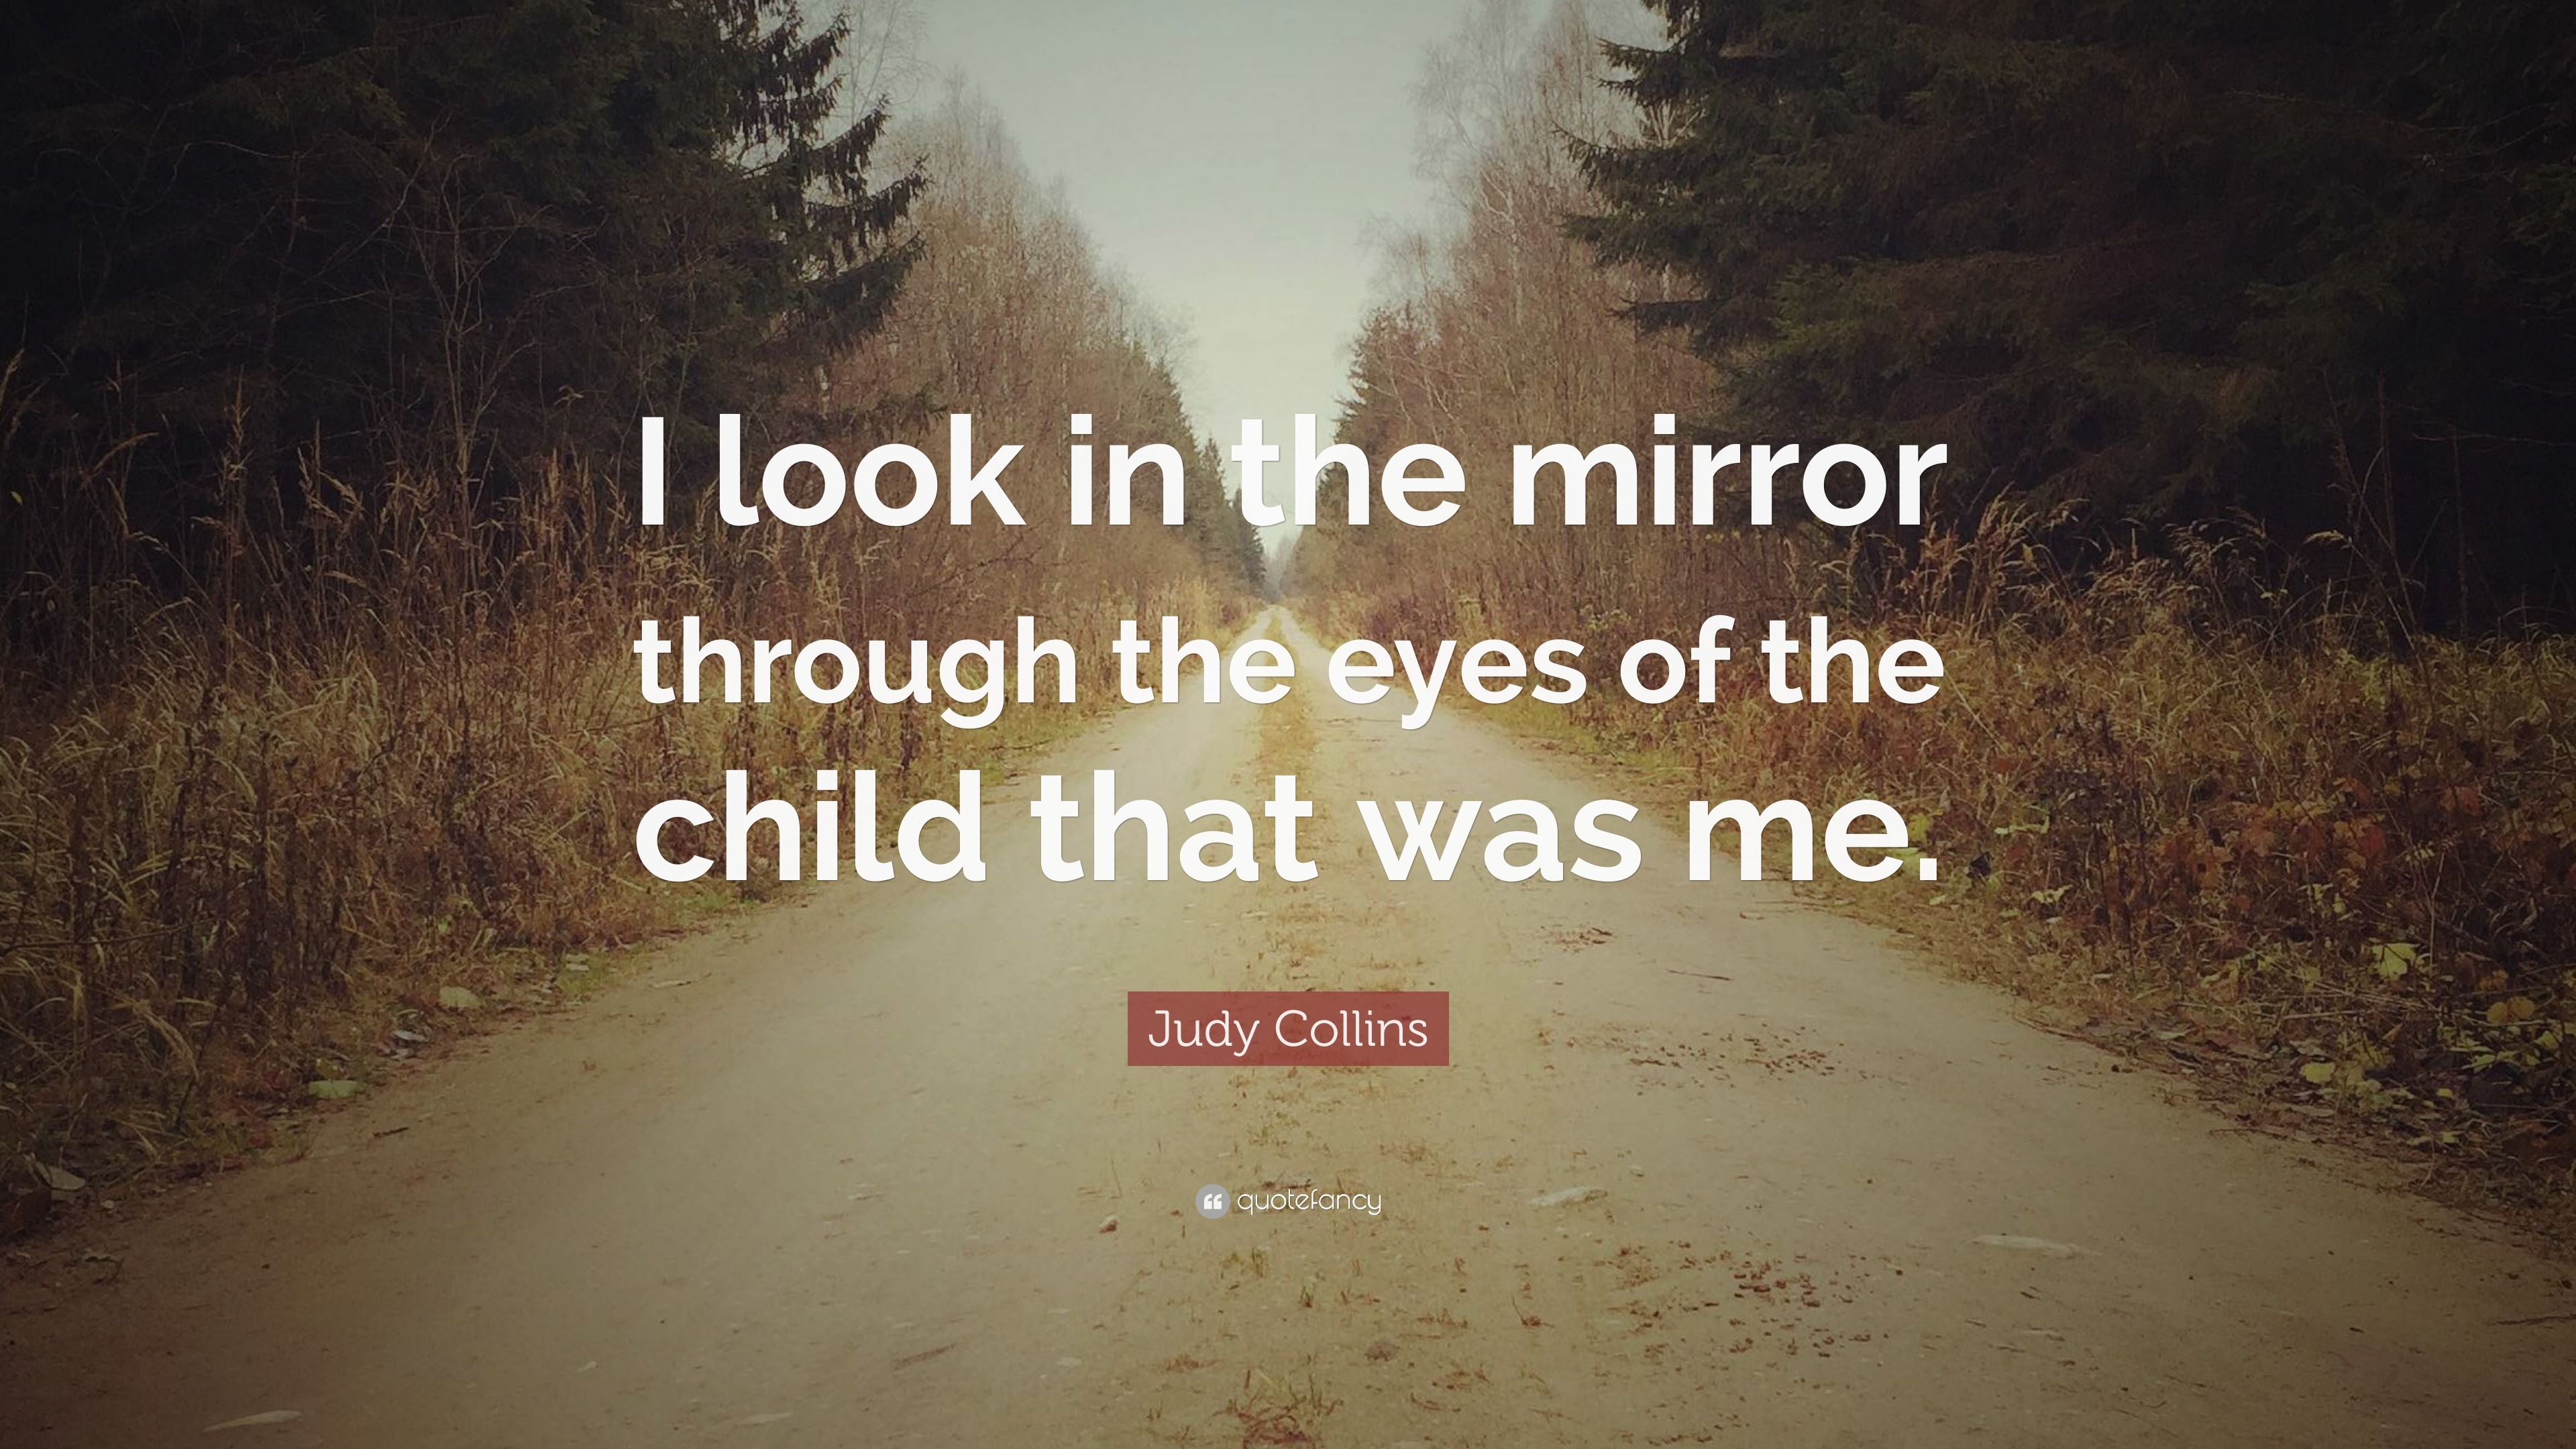 Judy Collins Quote: "I look in the mirror through the eyes of the child that was me."